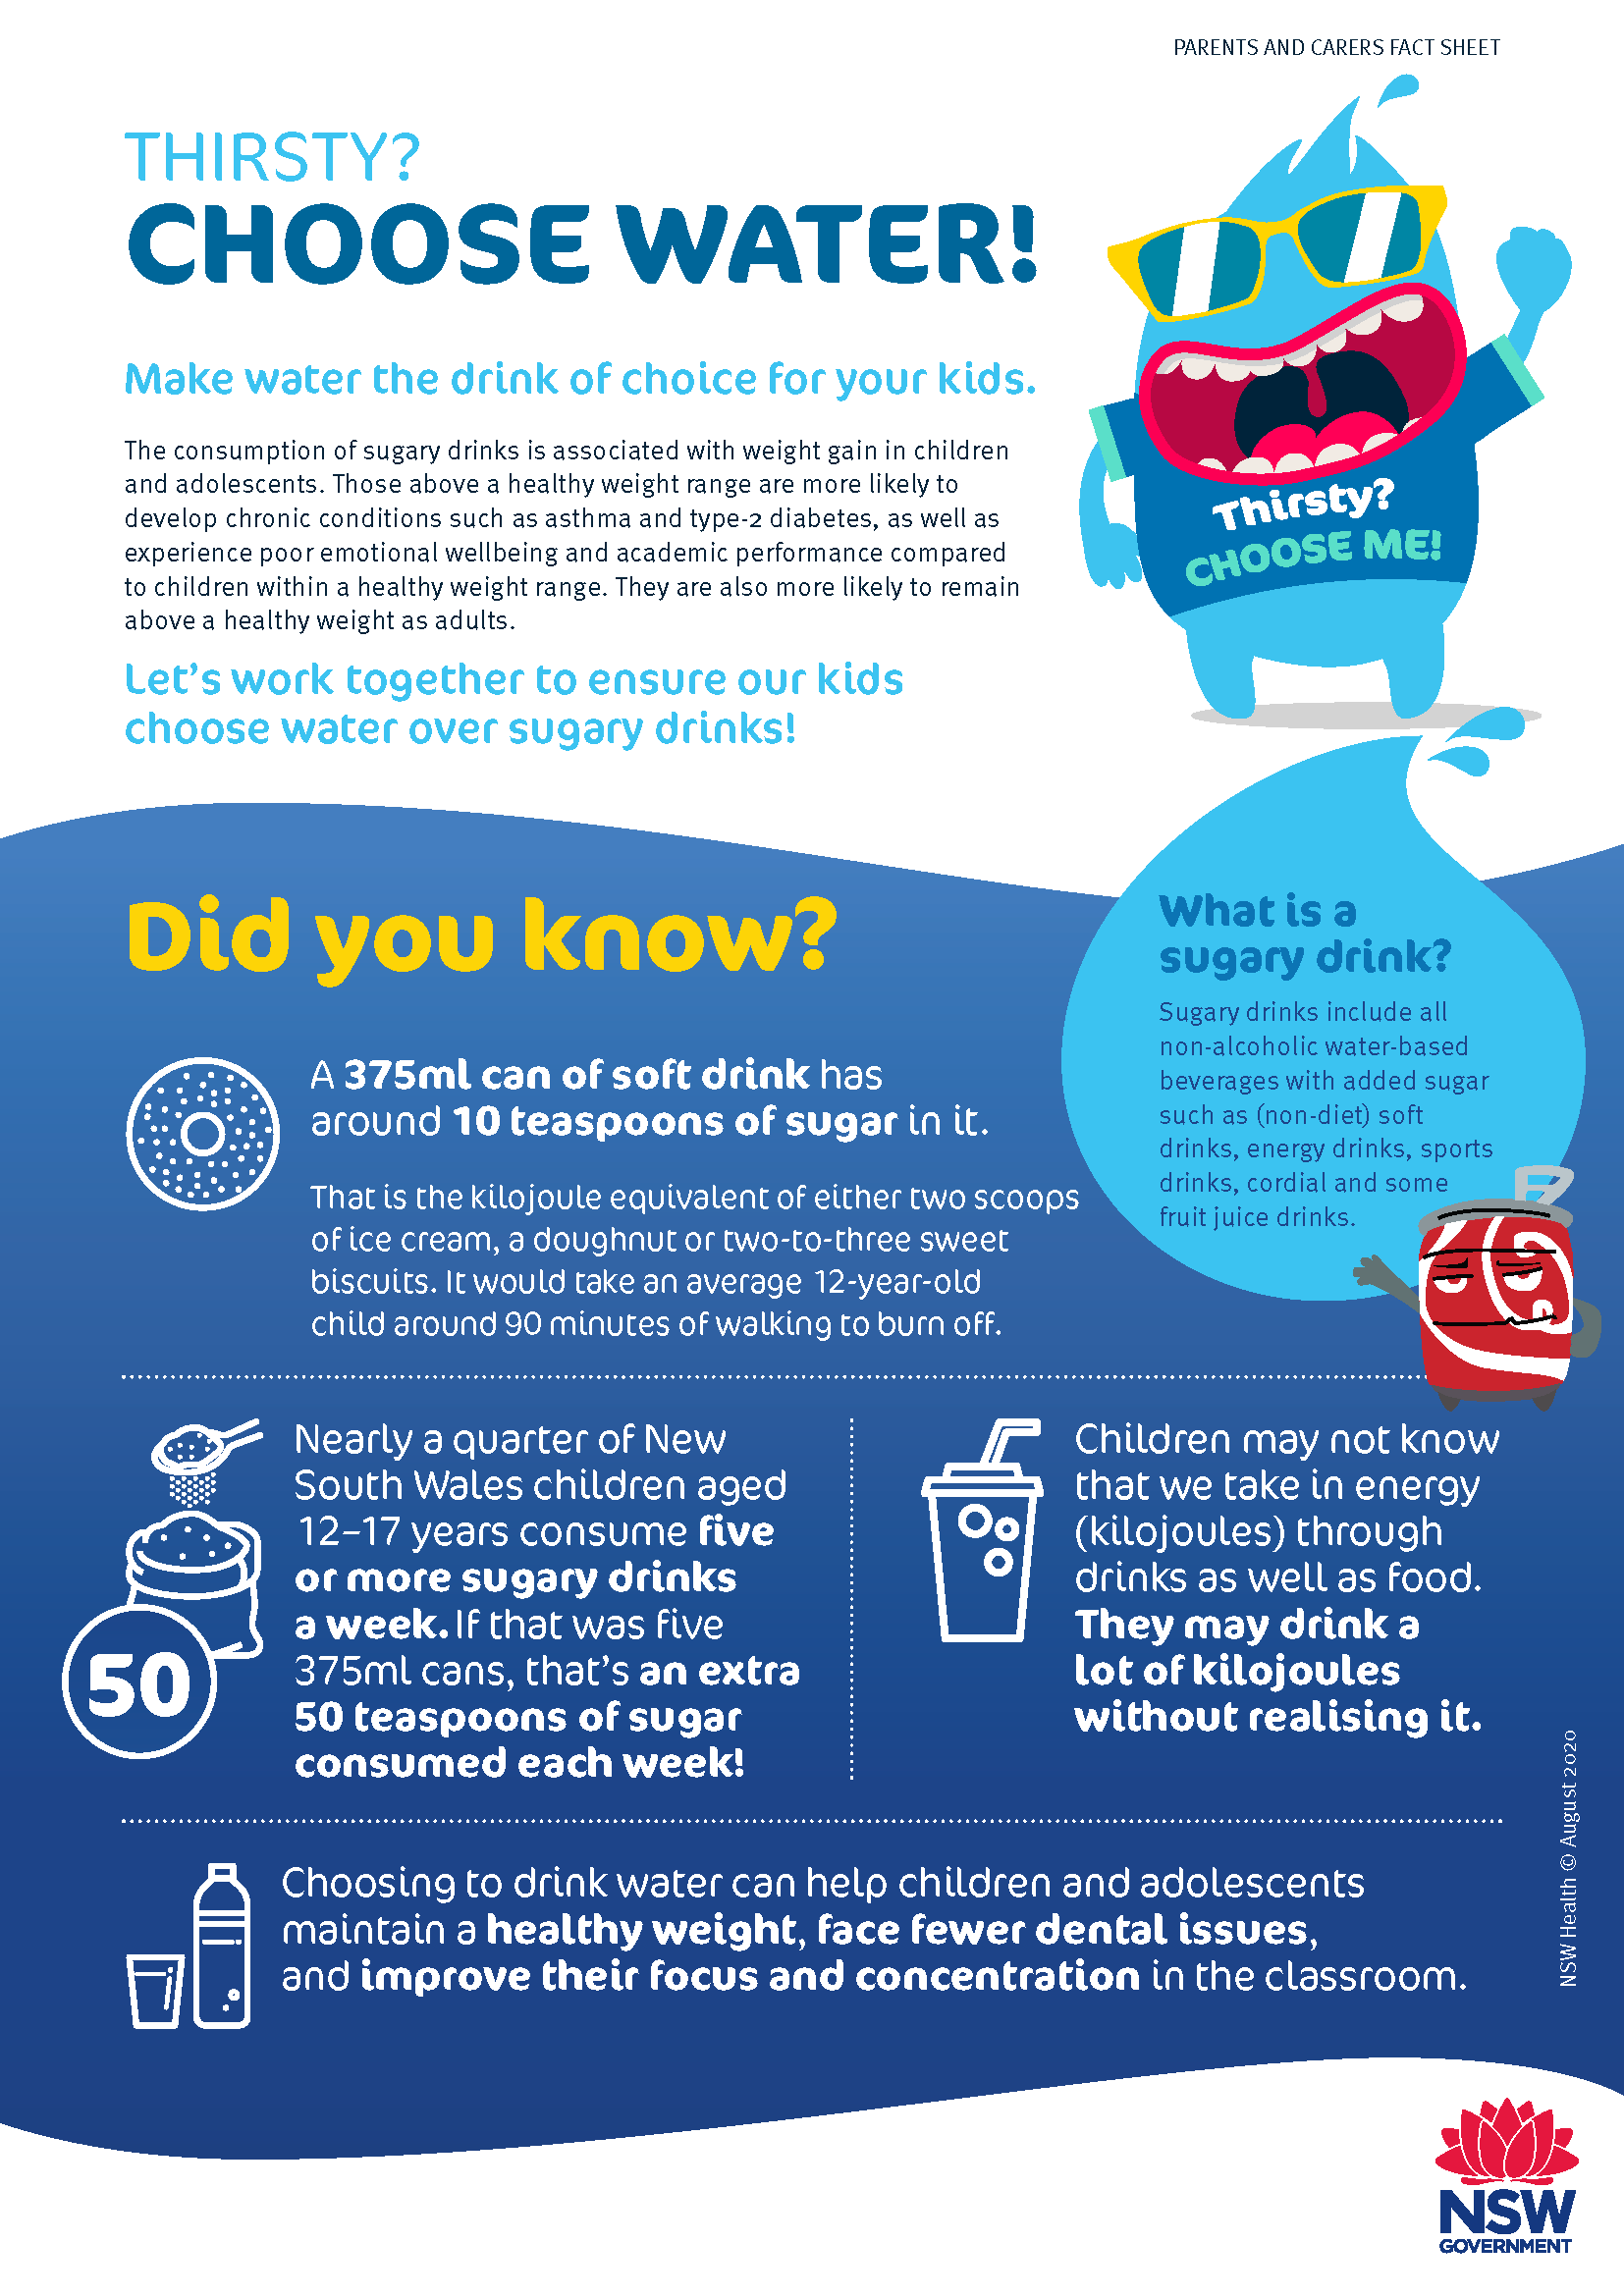 Thirsty? Choose Water! Parent and Carers Fact Sheet Benefits of Drinking Water